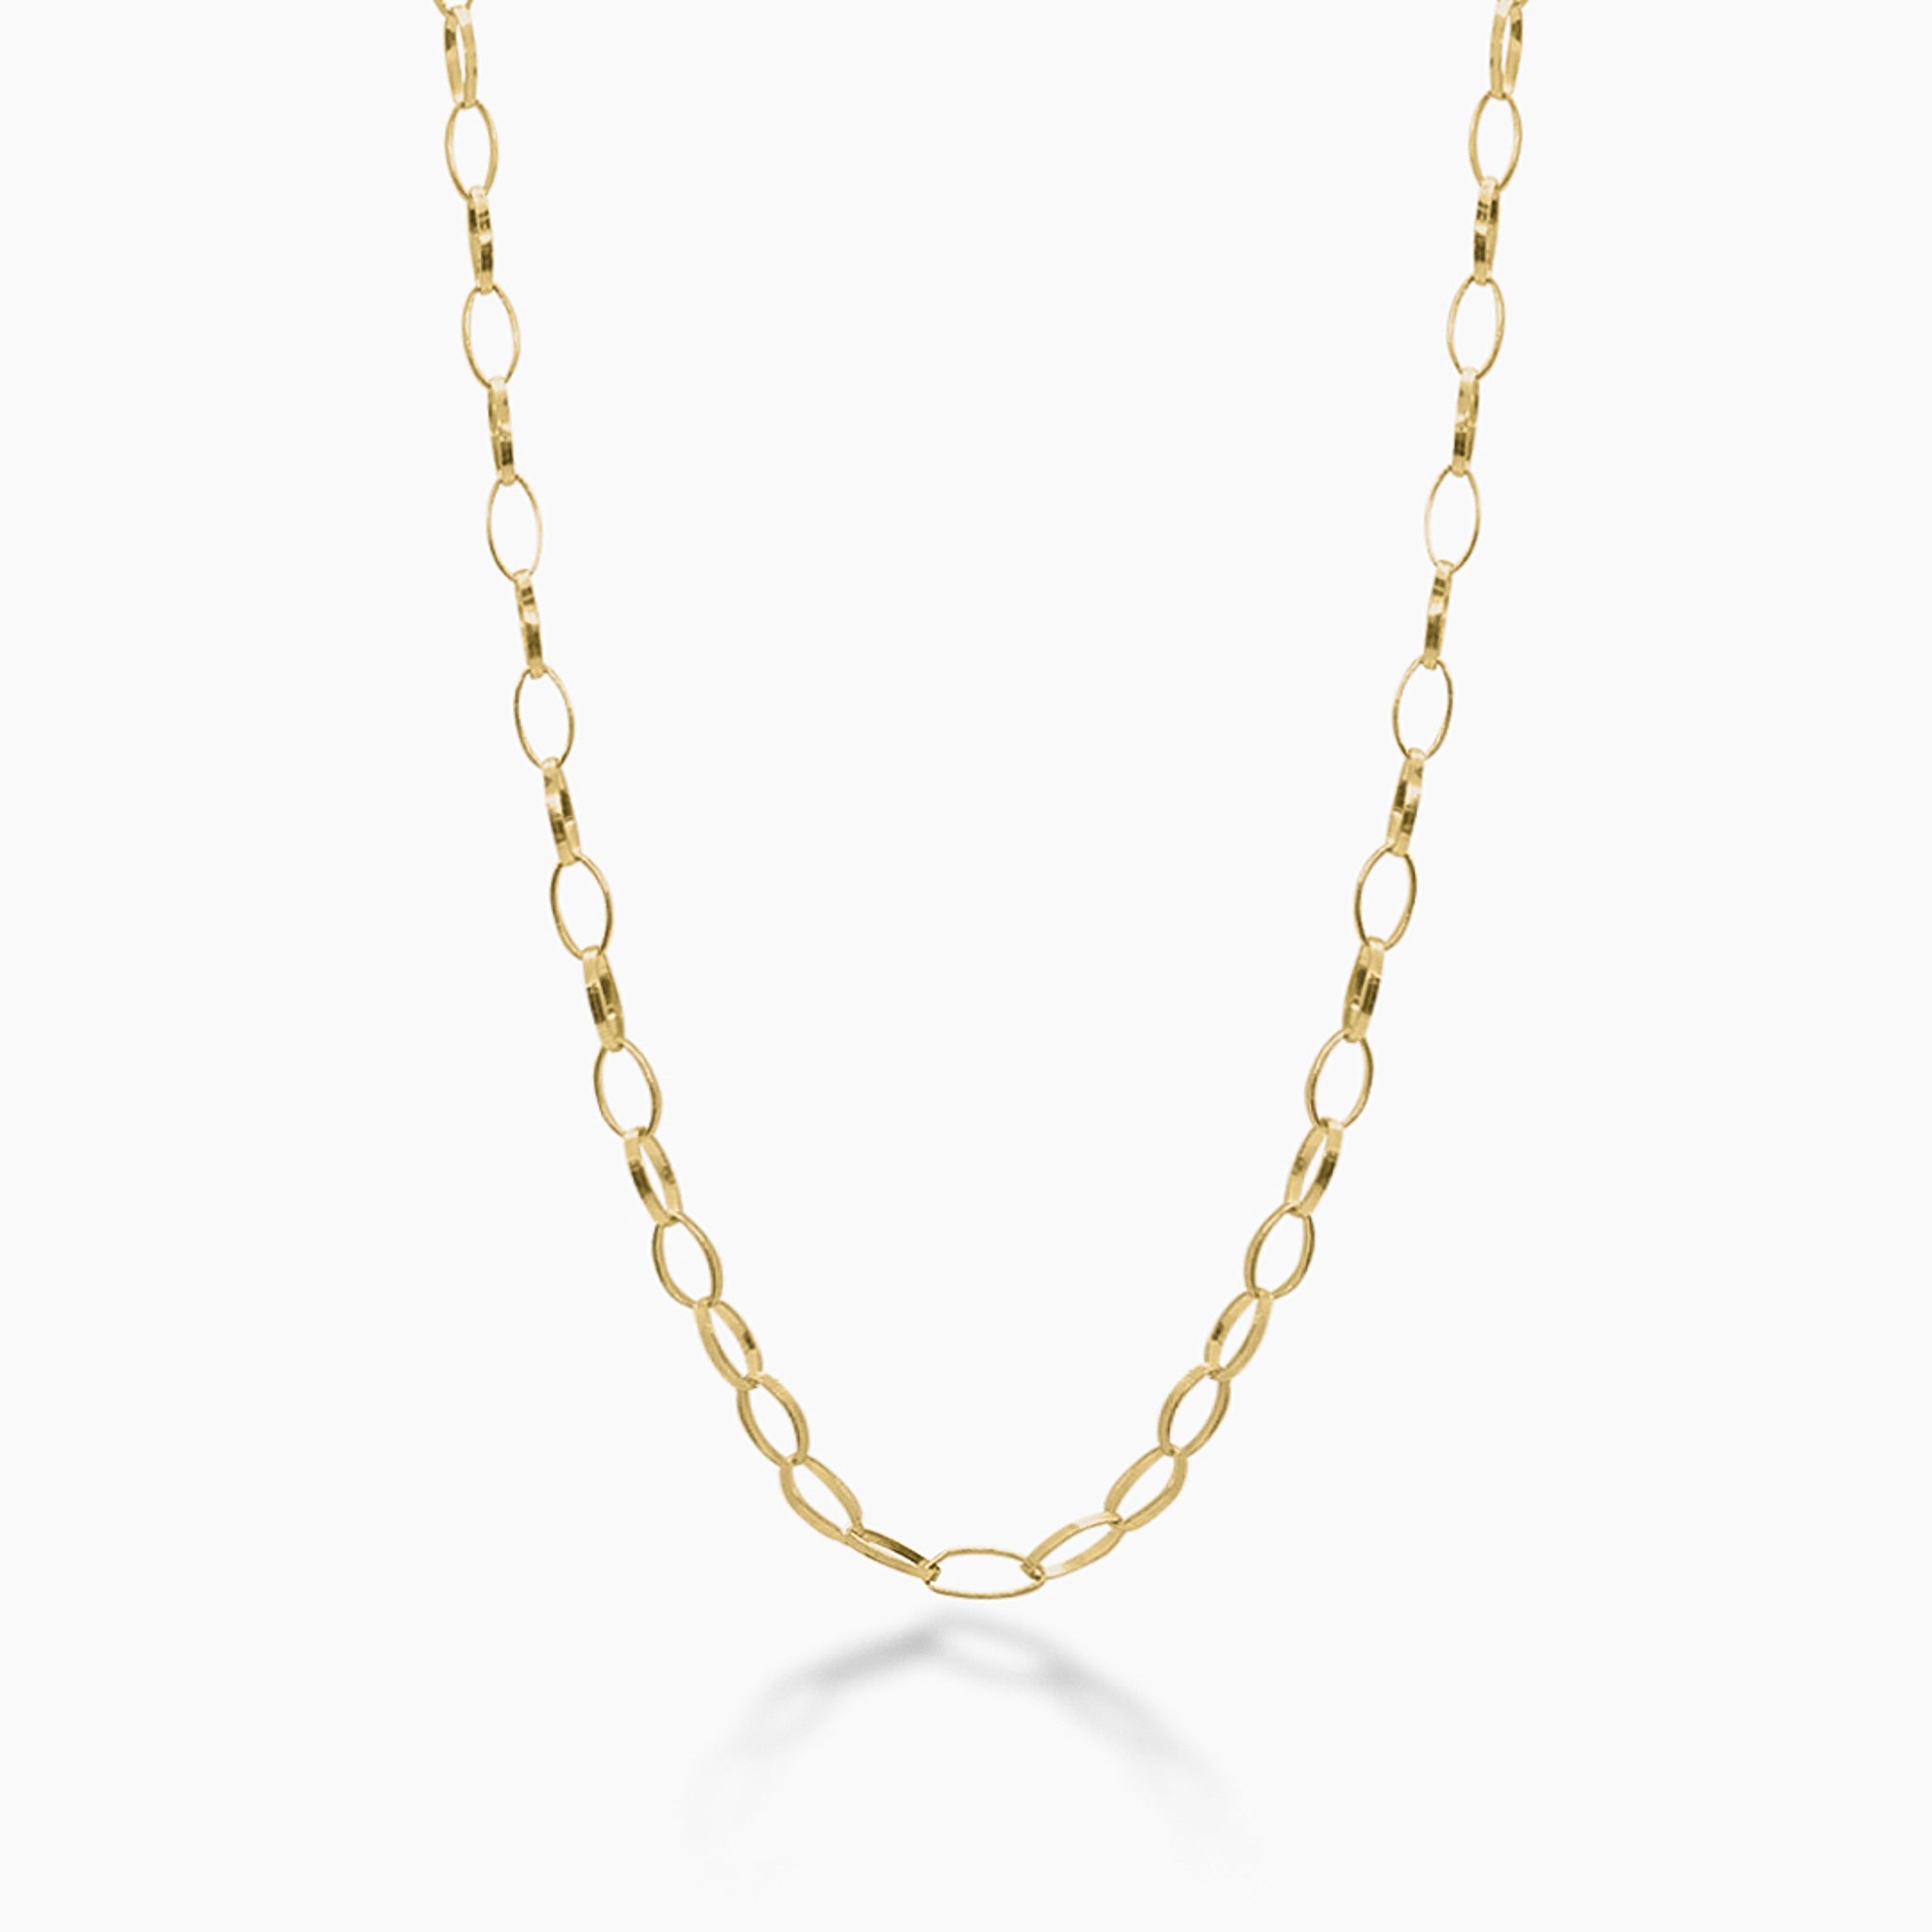 14K YELLOW GOLD OVAL LINK CHAIN